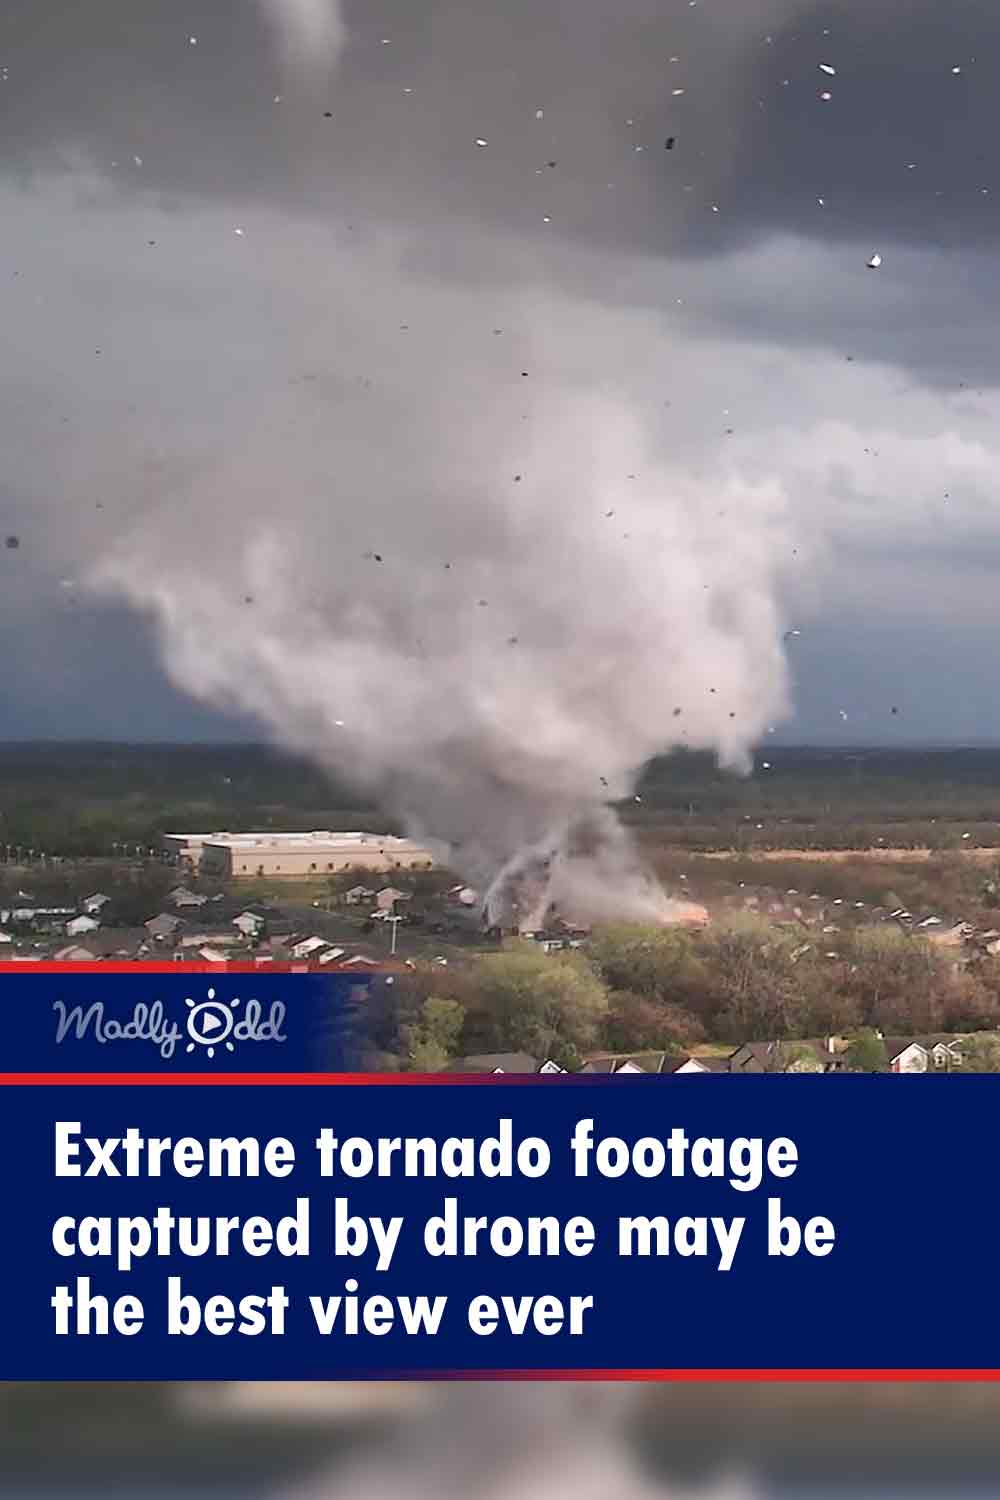 Extreme tornado footage captured by drone may be the best view ever